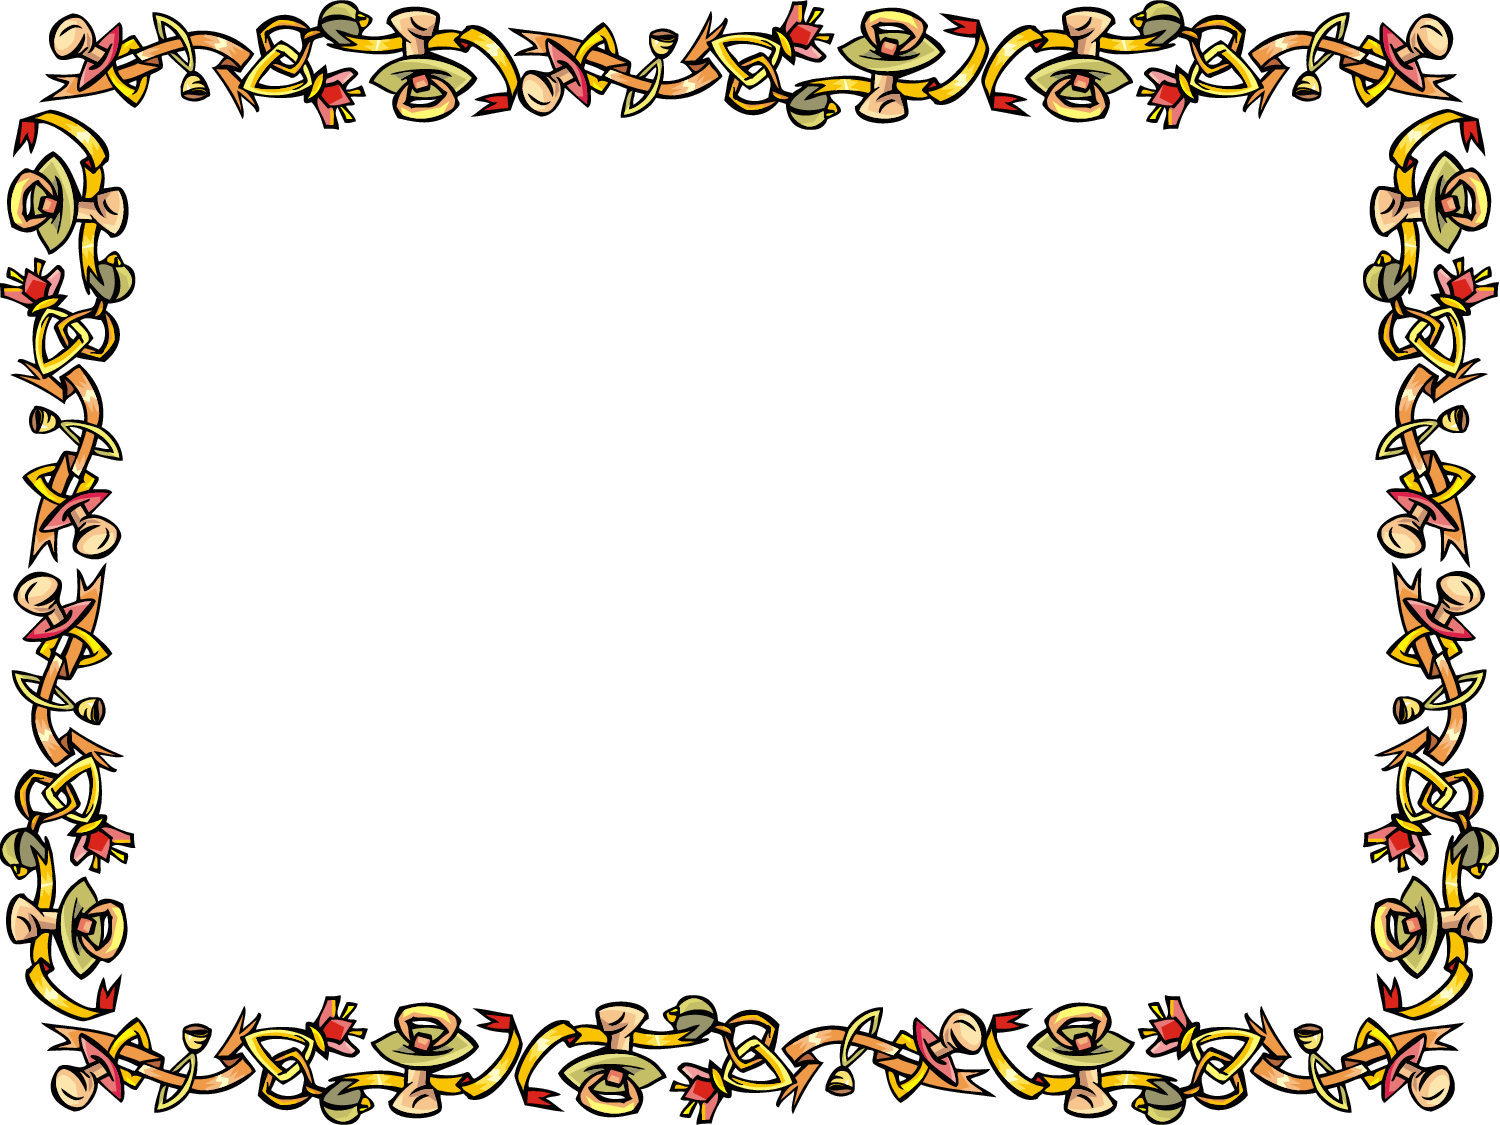 border design downloadable free borders for word documents templates